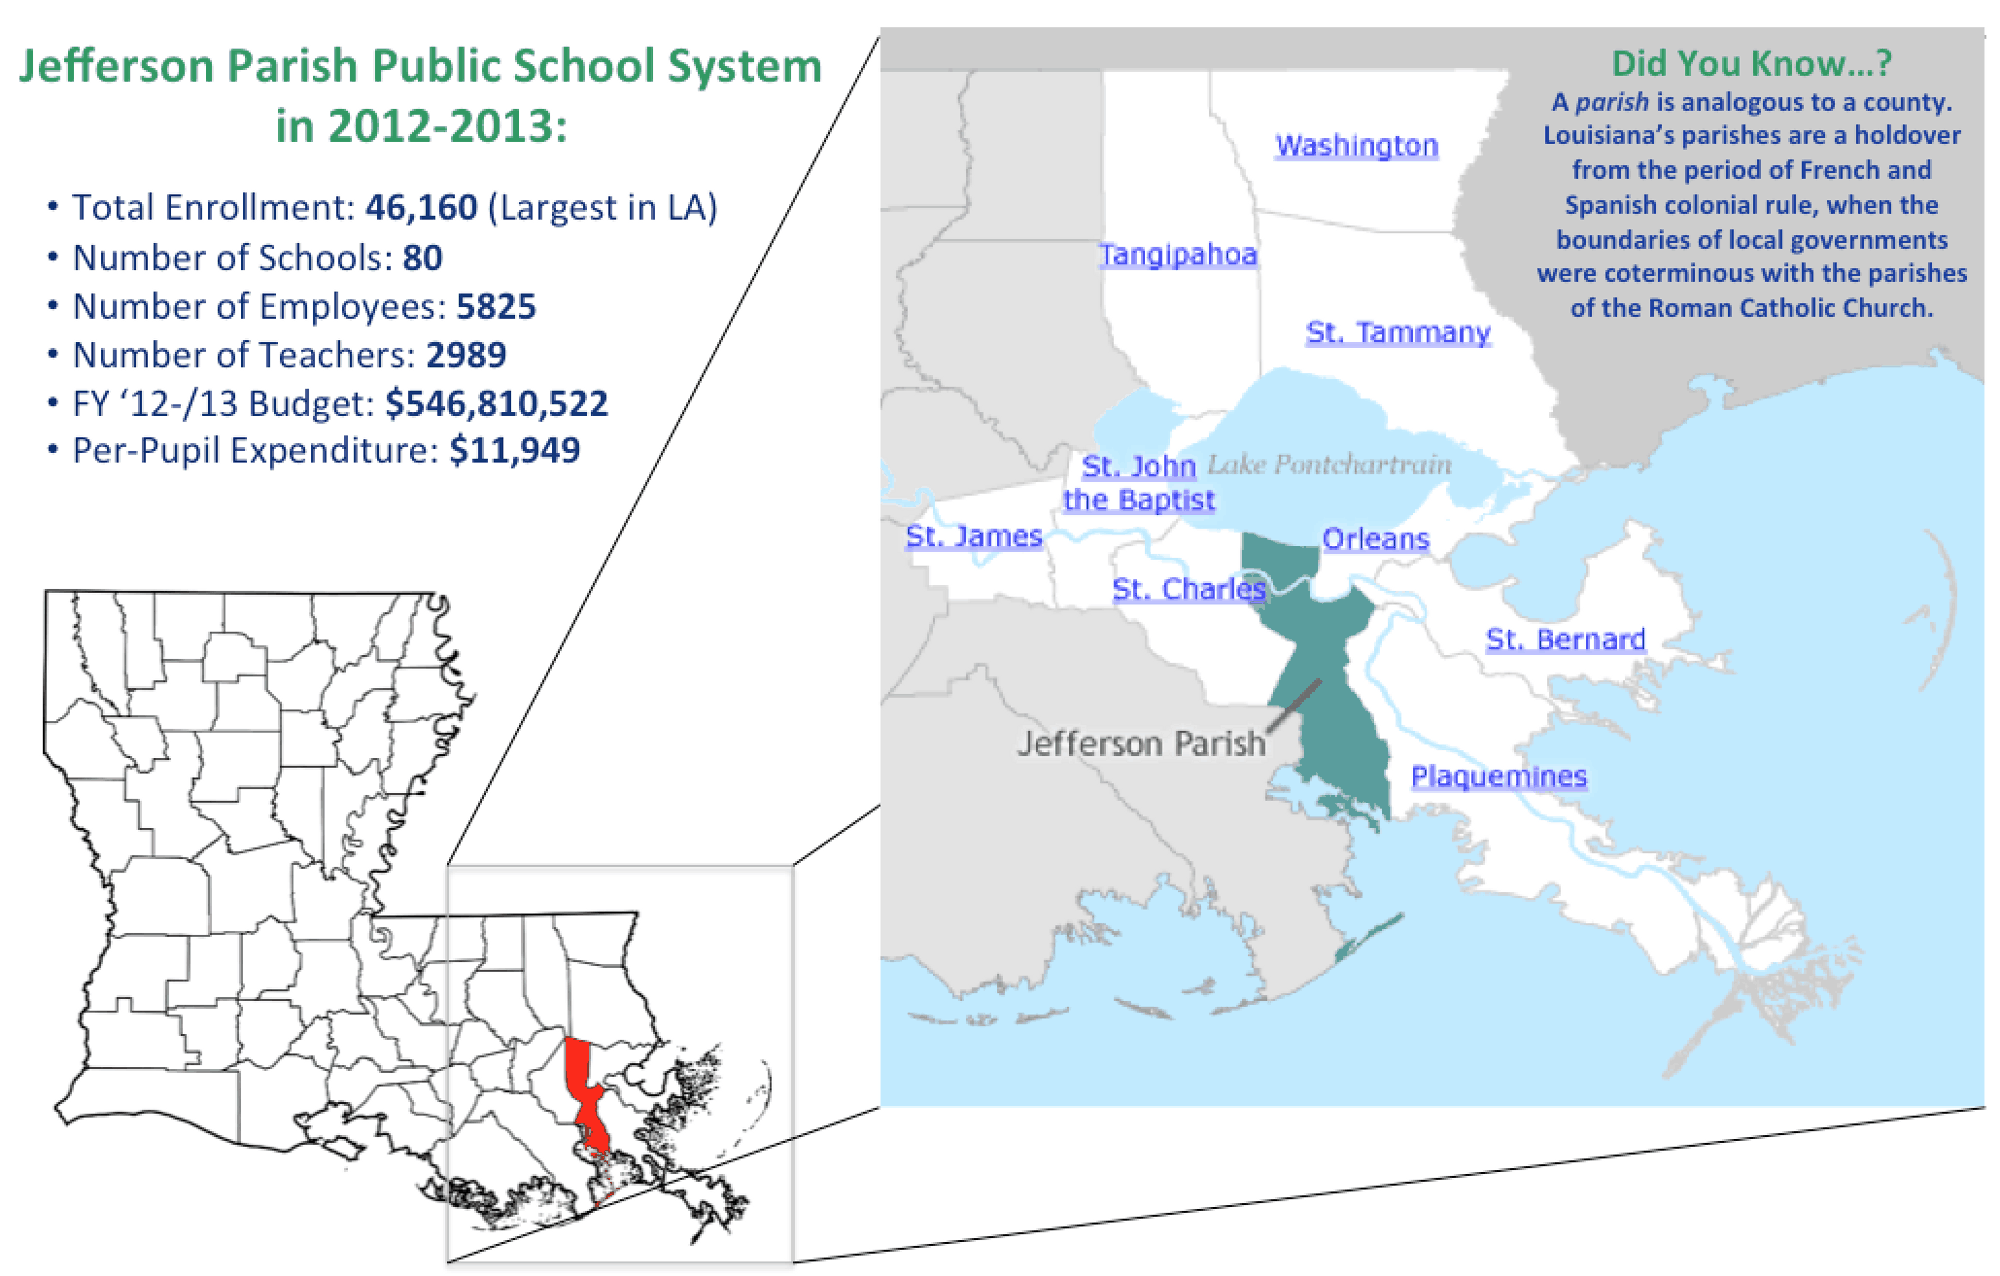 While much attention has been given to the “New Orleans Miracle,” the turnaround in neighboring Jefferson Parish Public Schools has implications for districts across the country.